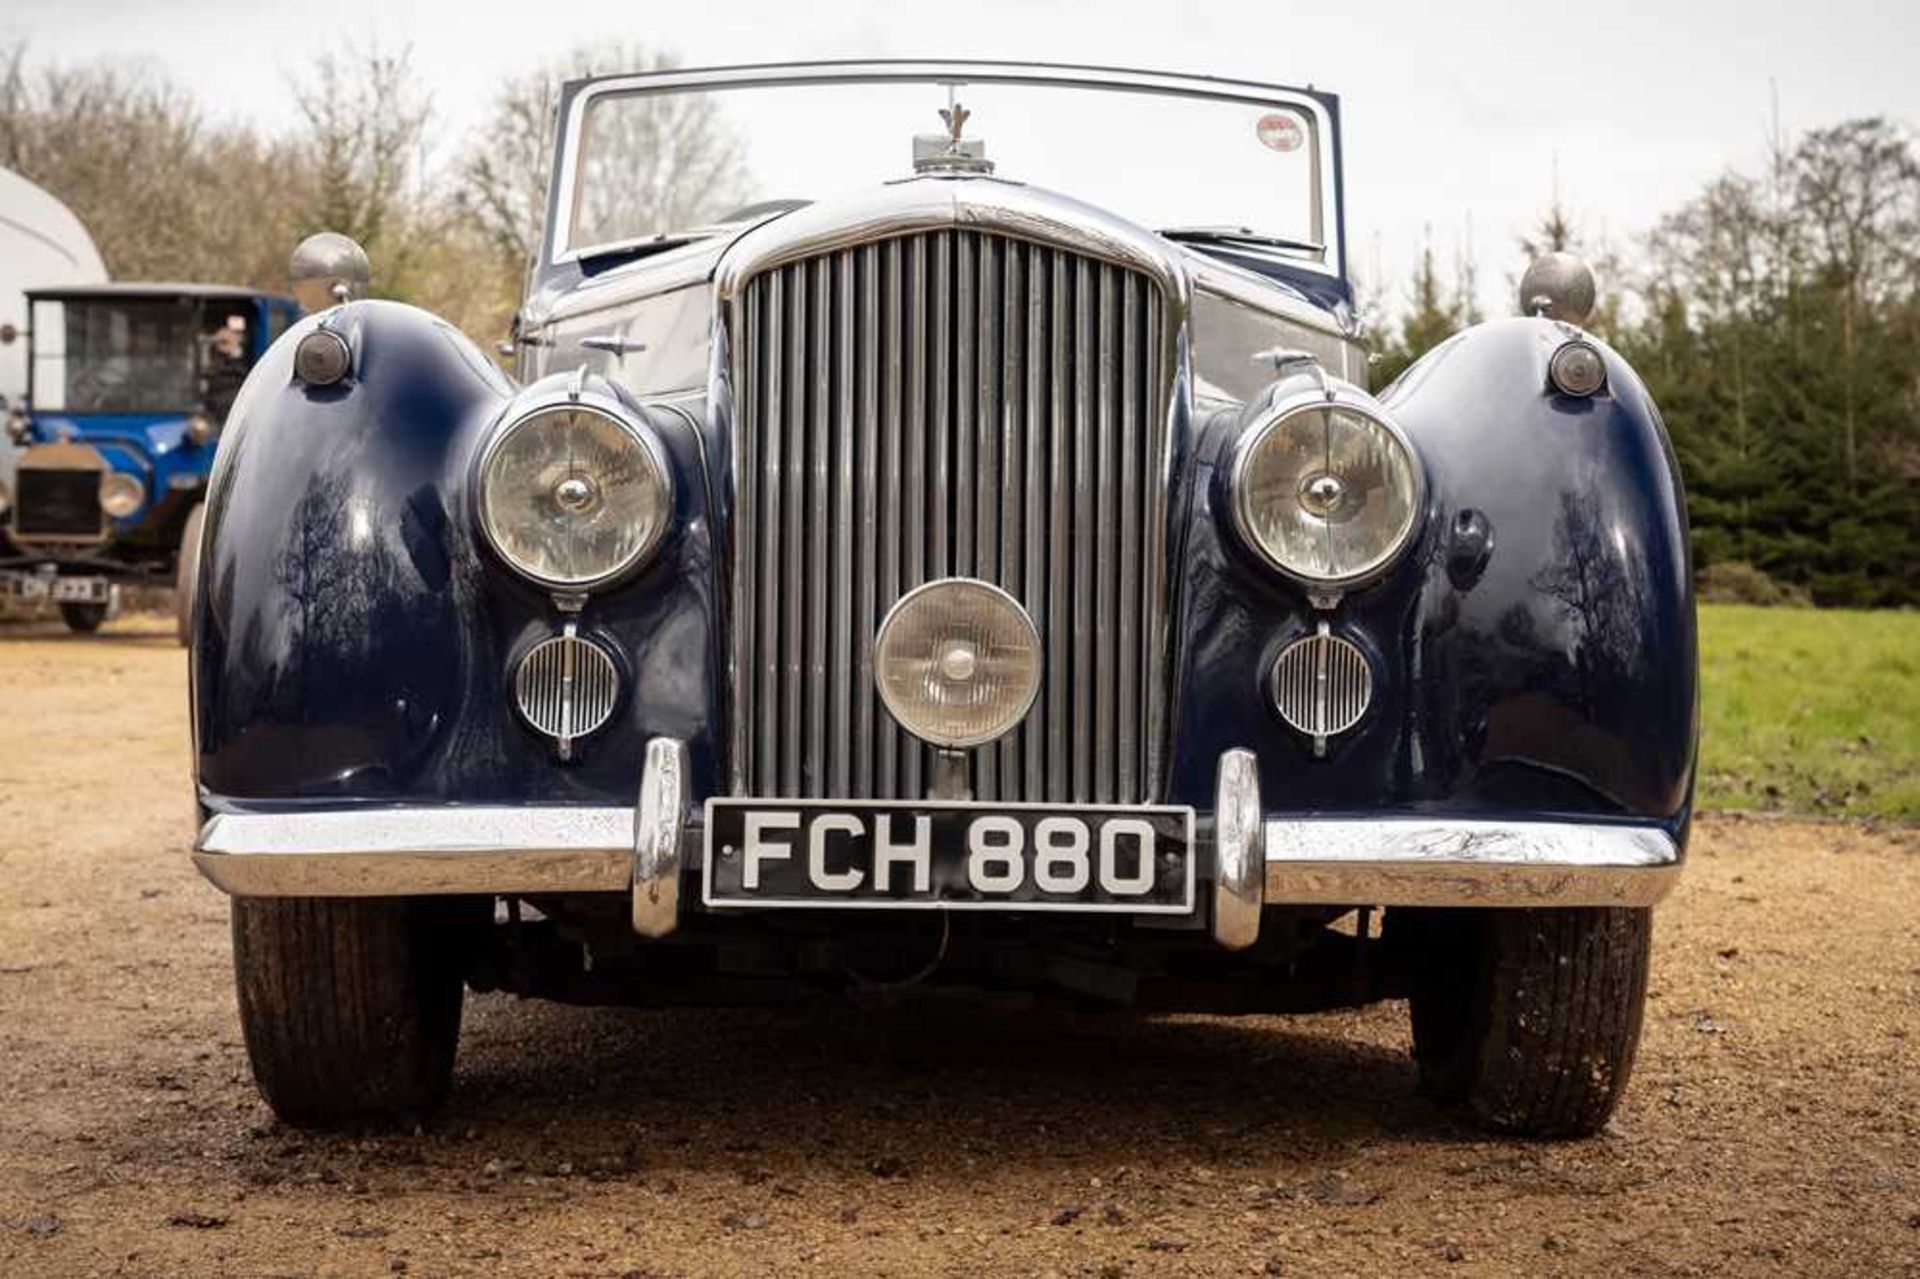 1954 Bentley R-Type Park Ward Drophead Coupe 1 of just 9 R-Type chassis clothed to Design 552 - Image 28 of 86